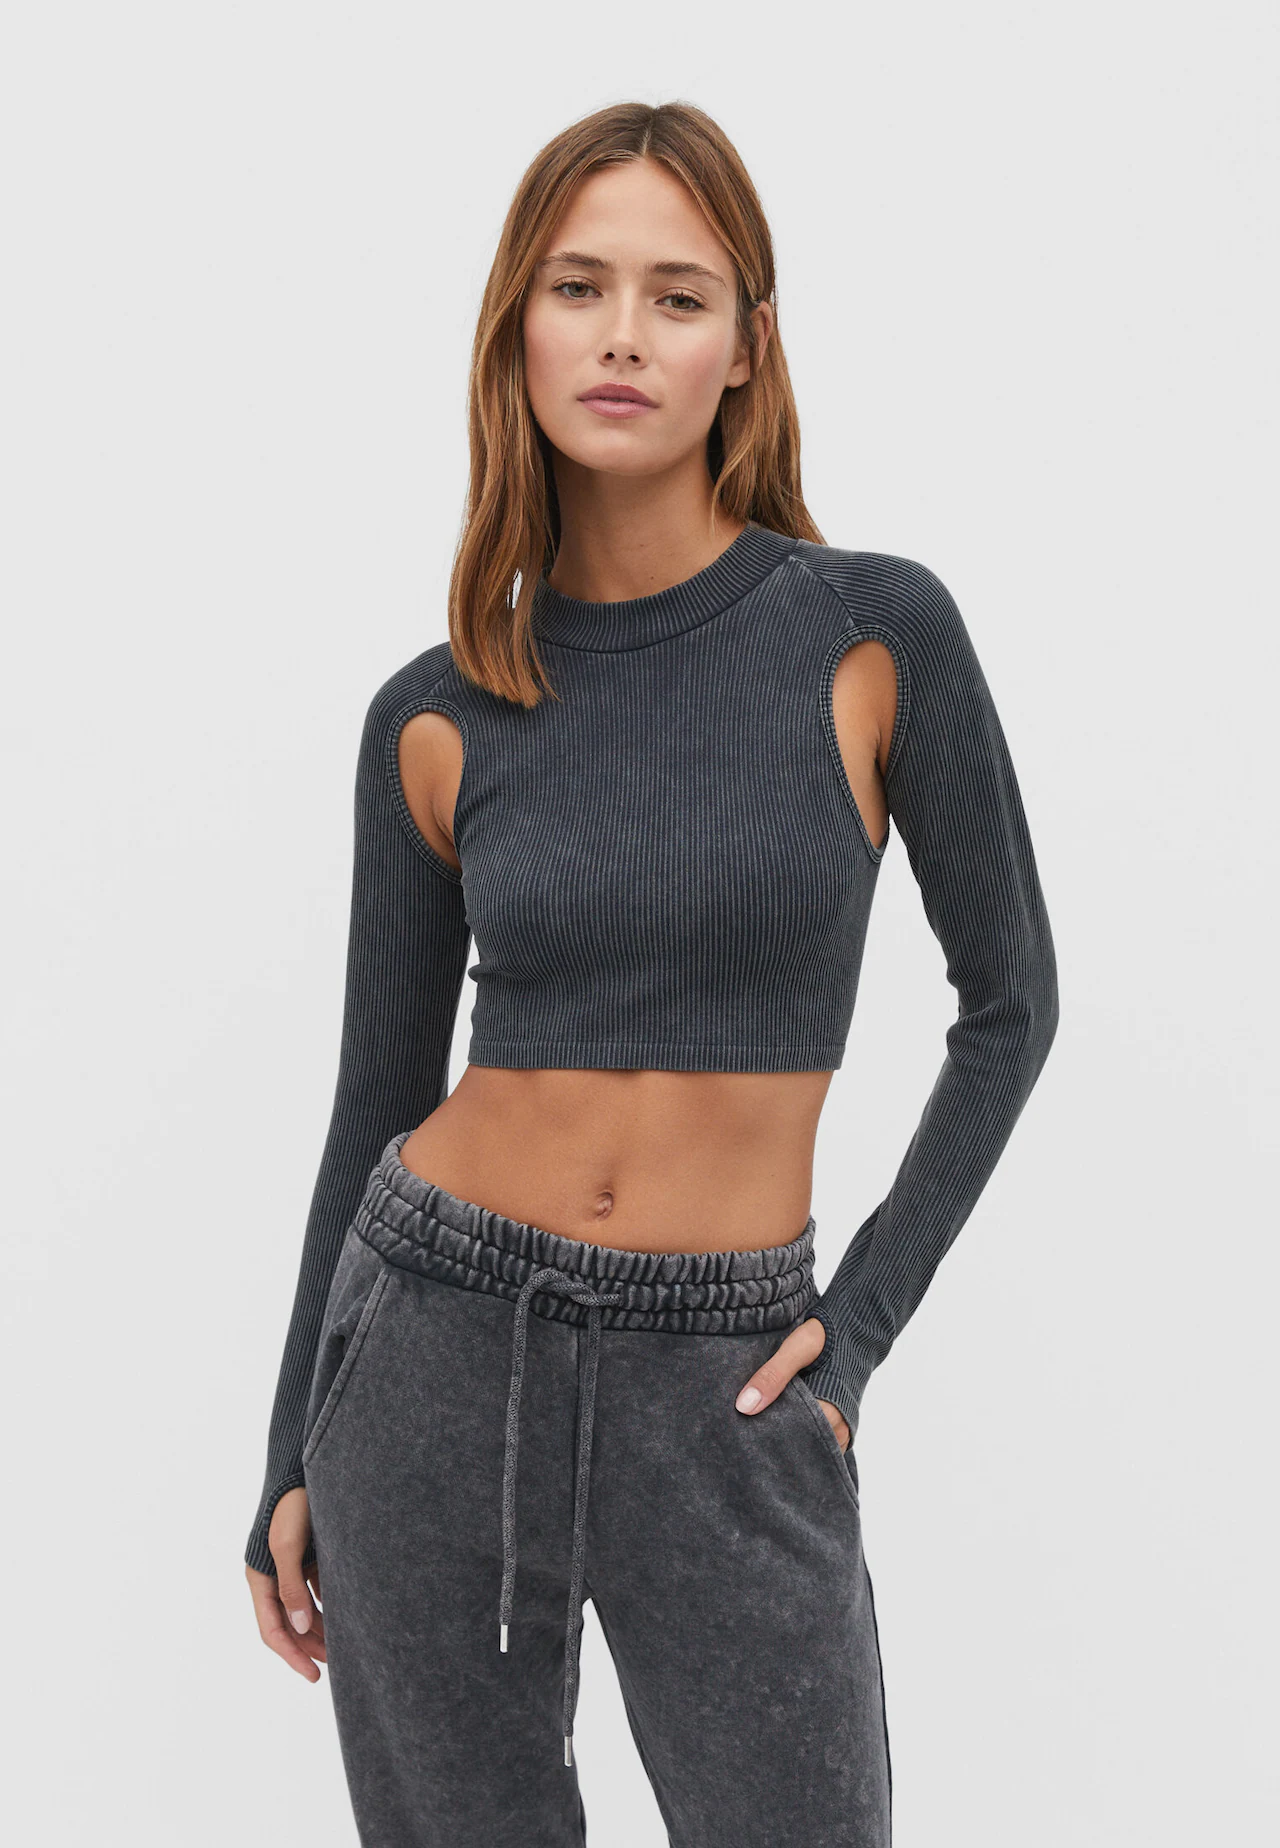 Seamless cut-out crop top - Women's fashion | Stradivarius United States